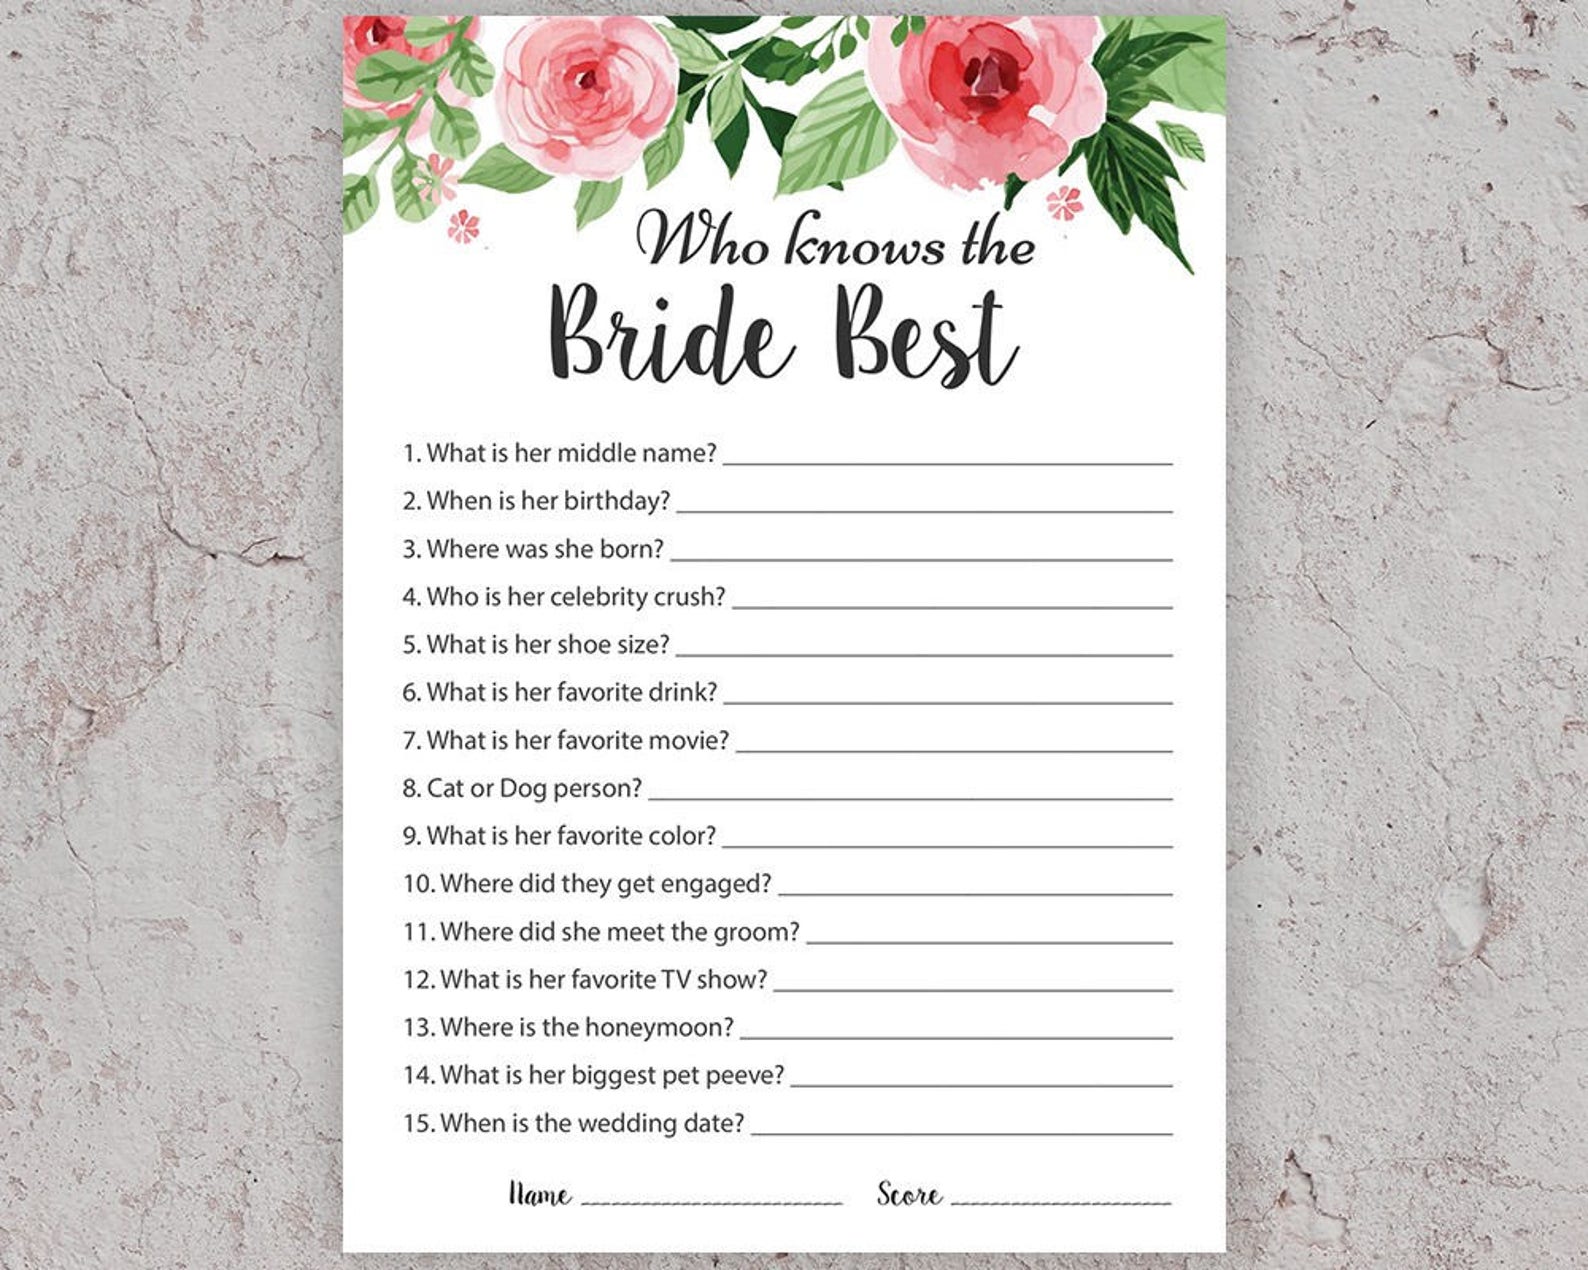 Who Knows the Bride Best Bridal Shower Games How Well Do You - Etsy